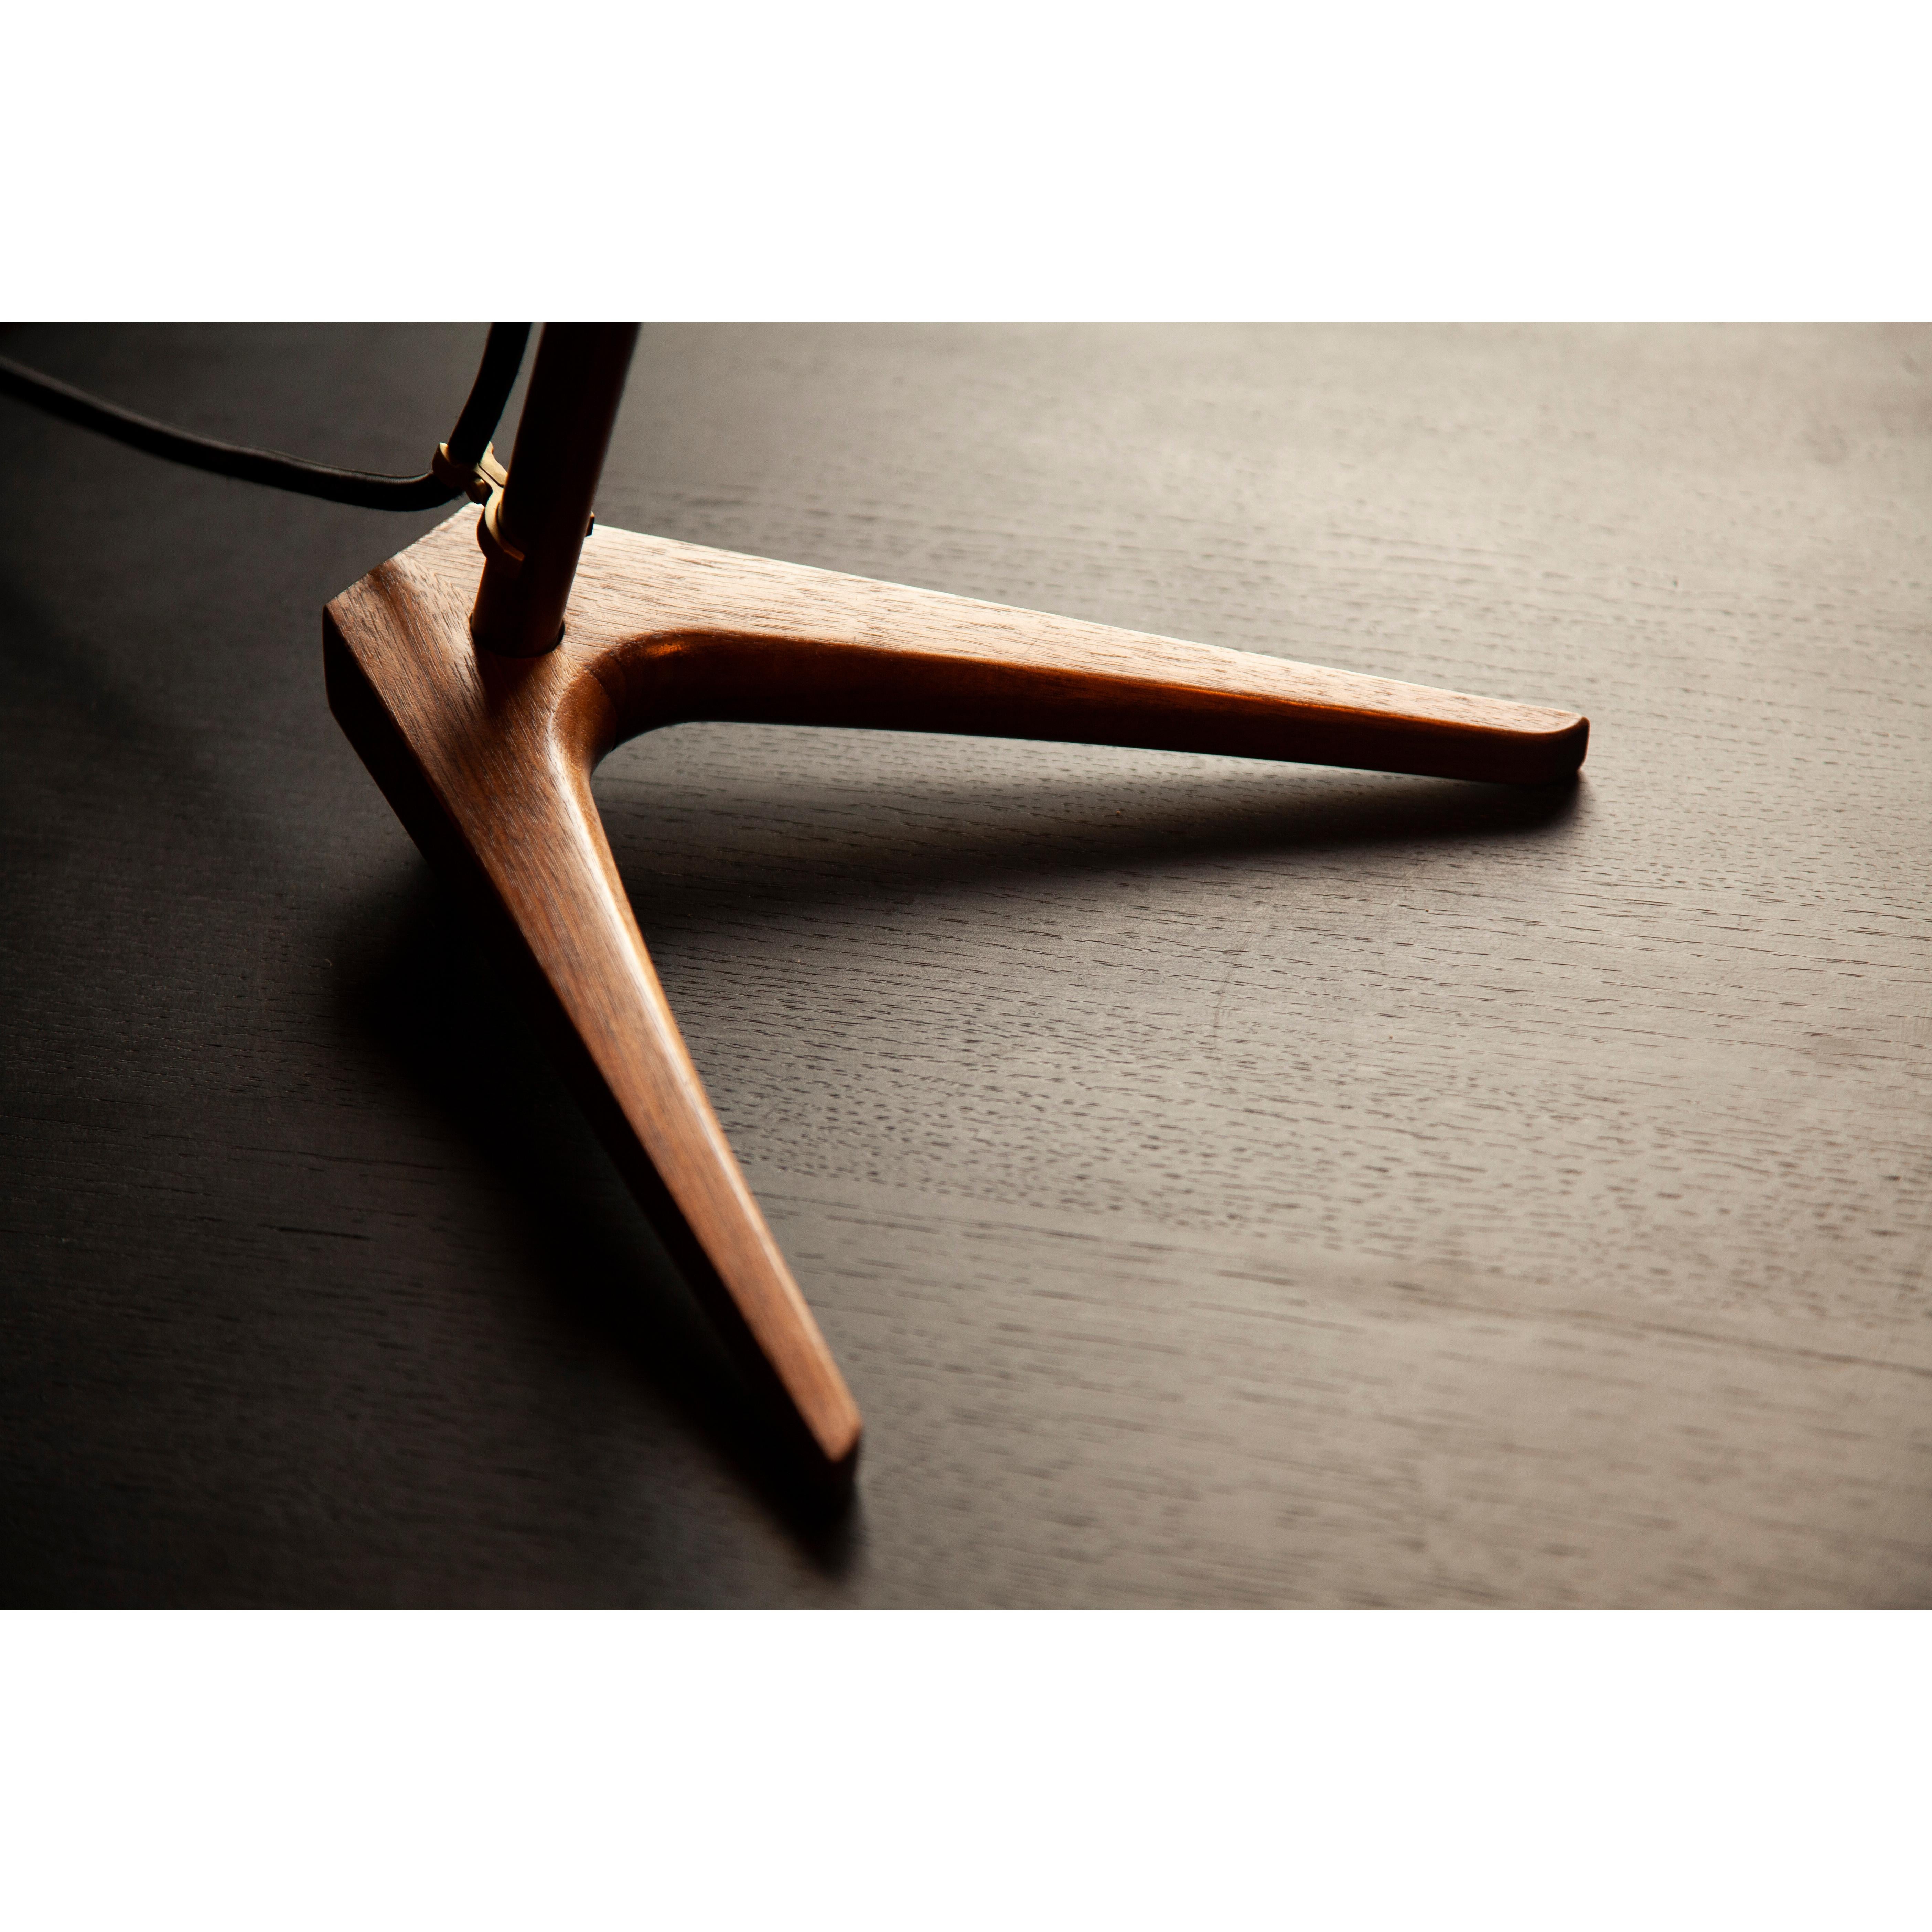 Heavily influenced by The Armitage Floor Lamp, our desk lamp shares the same DNA including a walnut structure with brushed brass detailing, the shade is sustainably sourced from a recycled water bottle felt laminate. 

Using warm to dim bulbs it